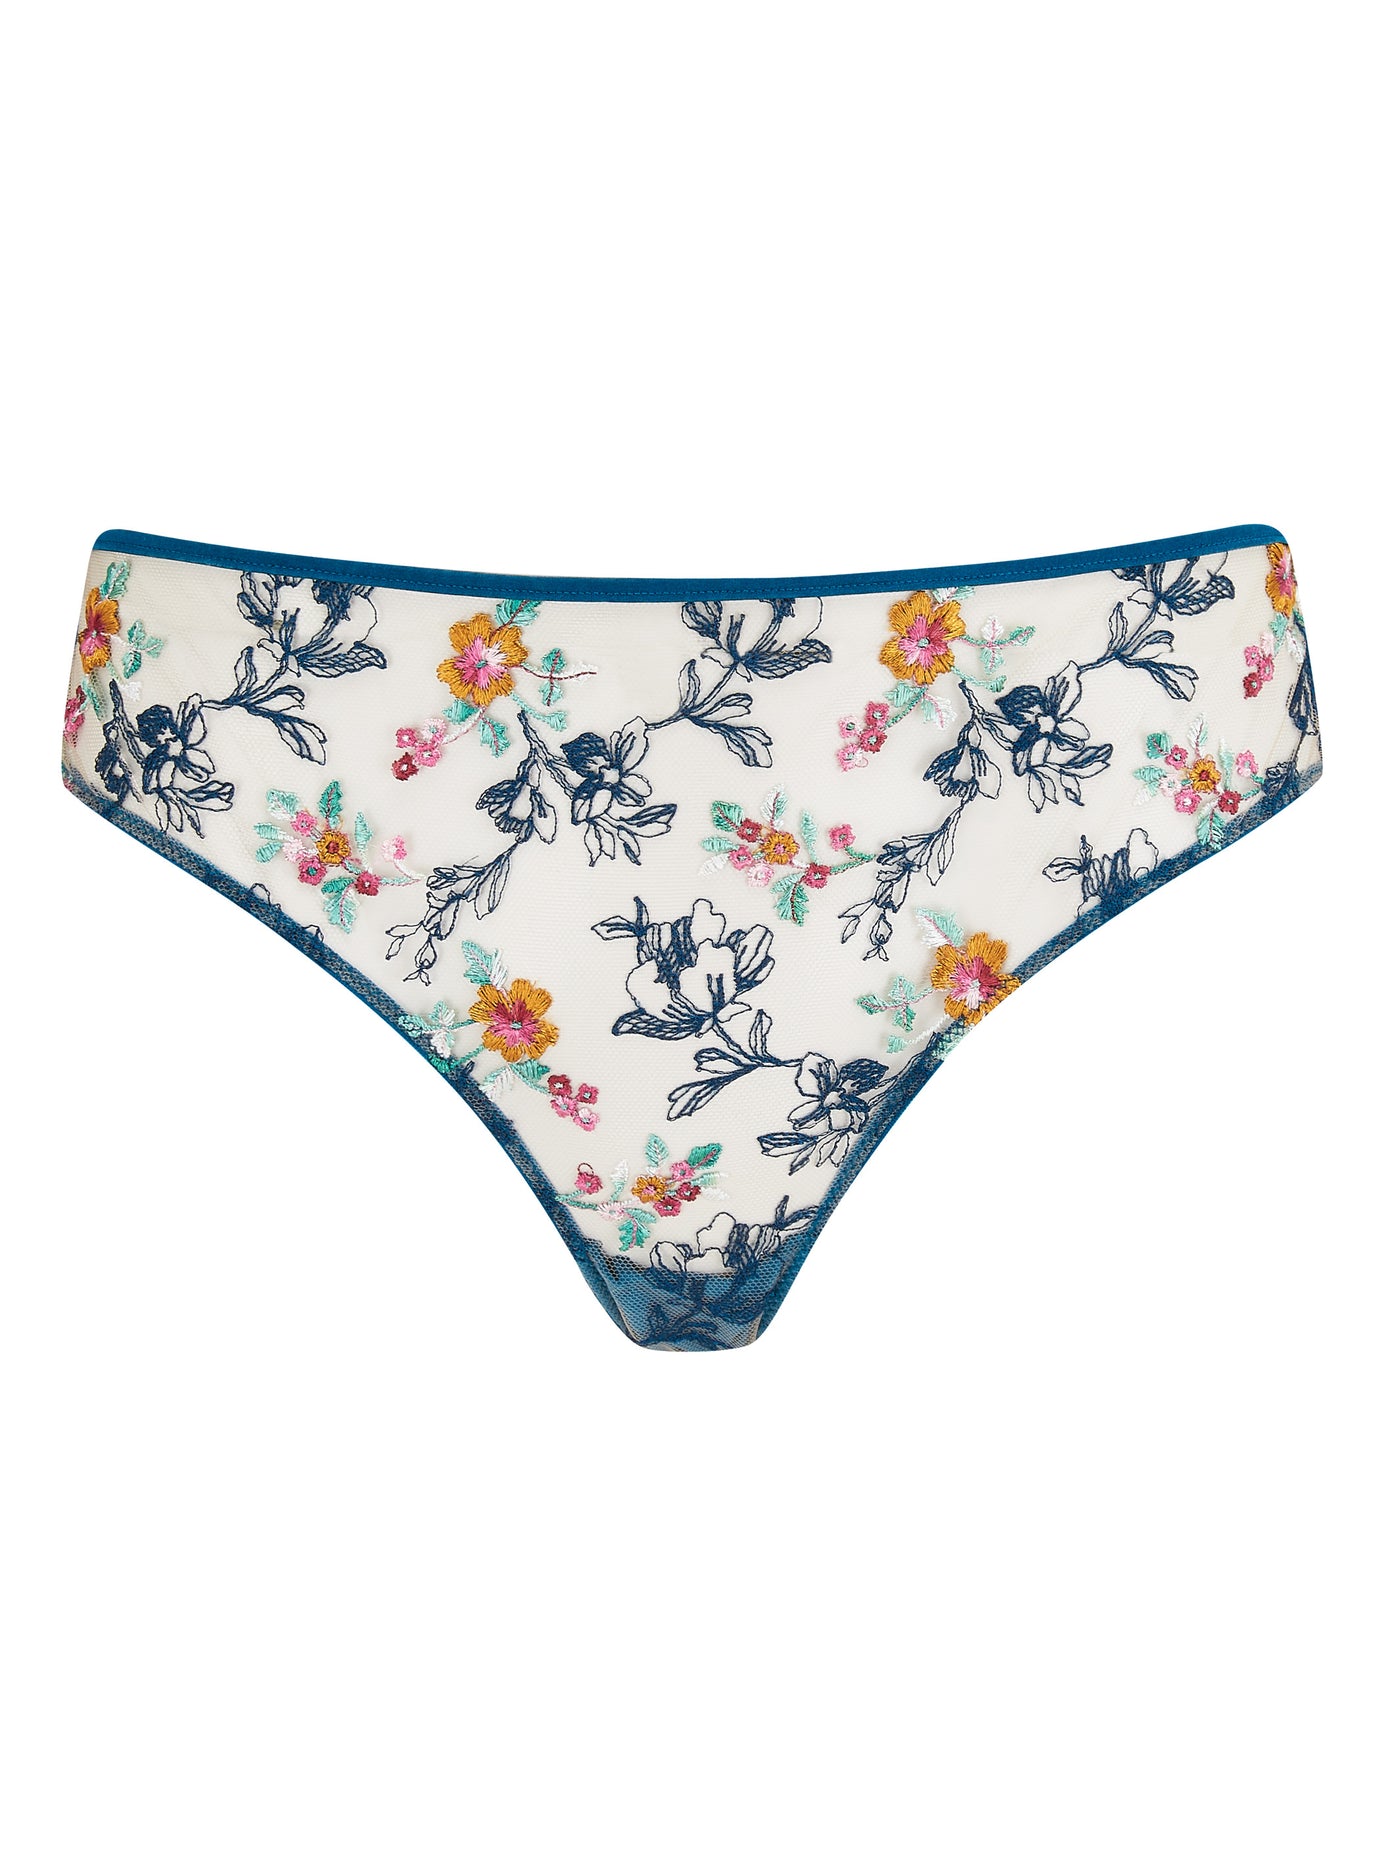 Evelyn cyan floral embroidered knickers